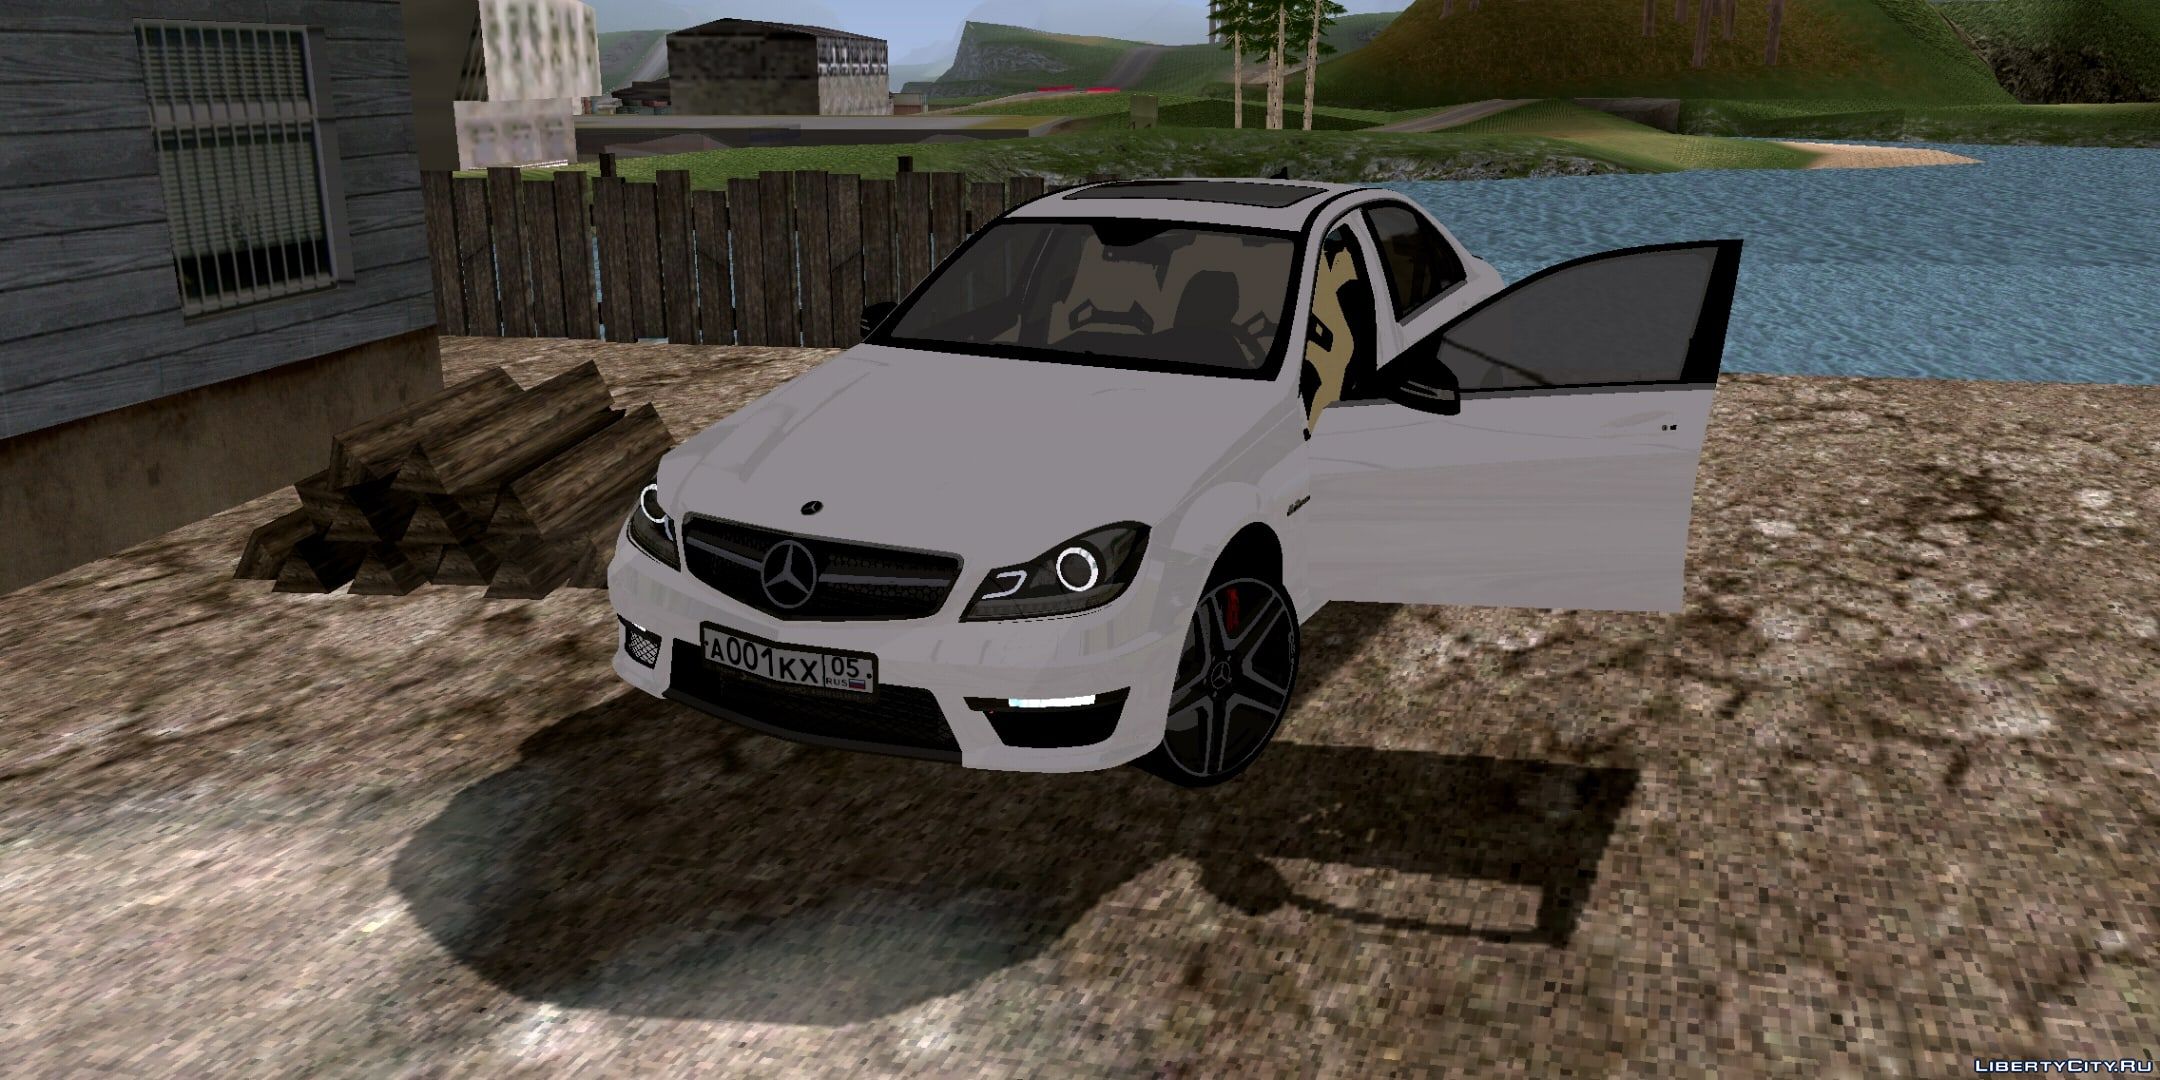 Files for GTA San Andreas (iOS, Android): cars, mods, skins